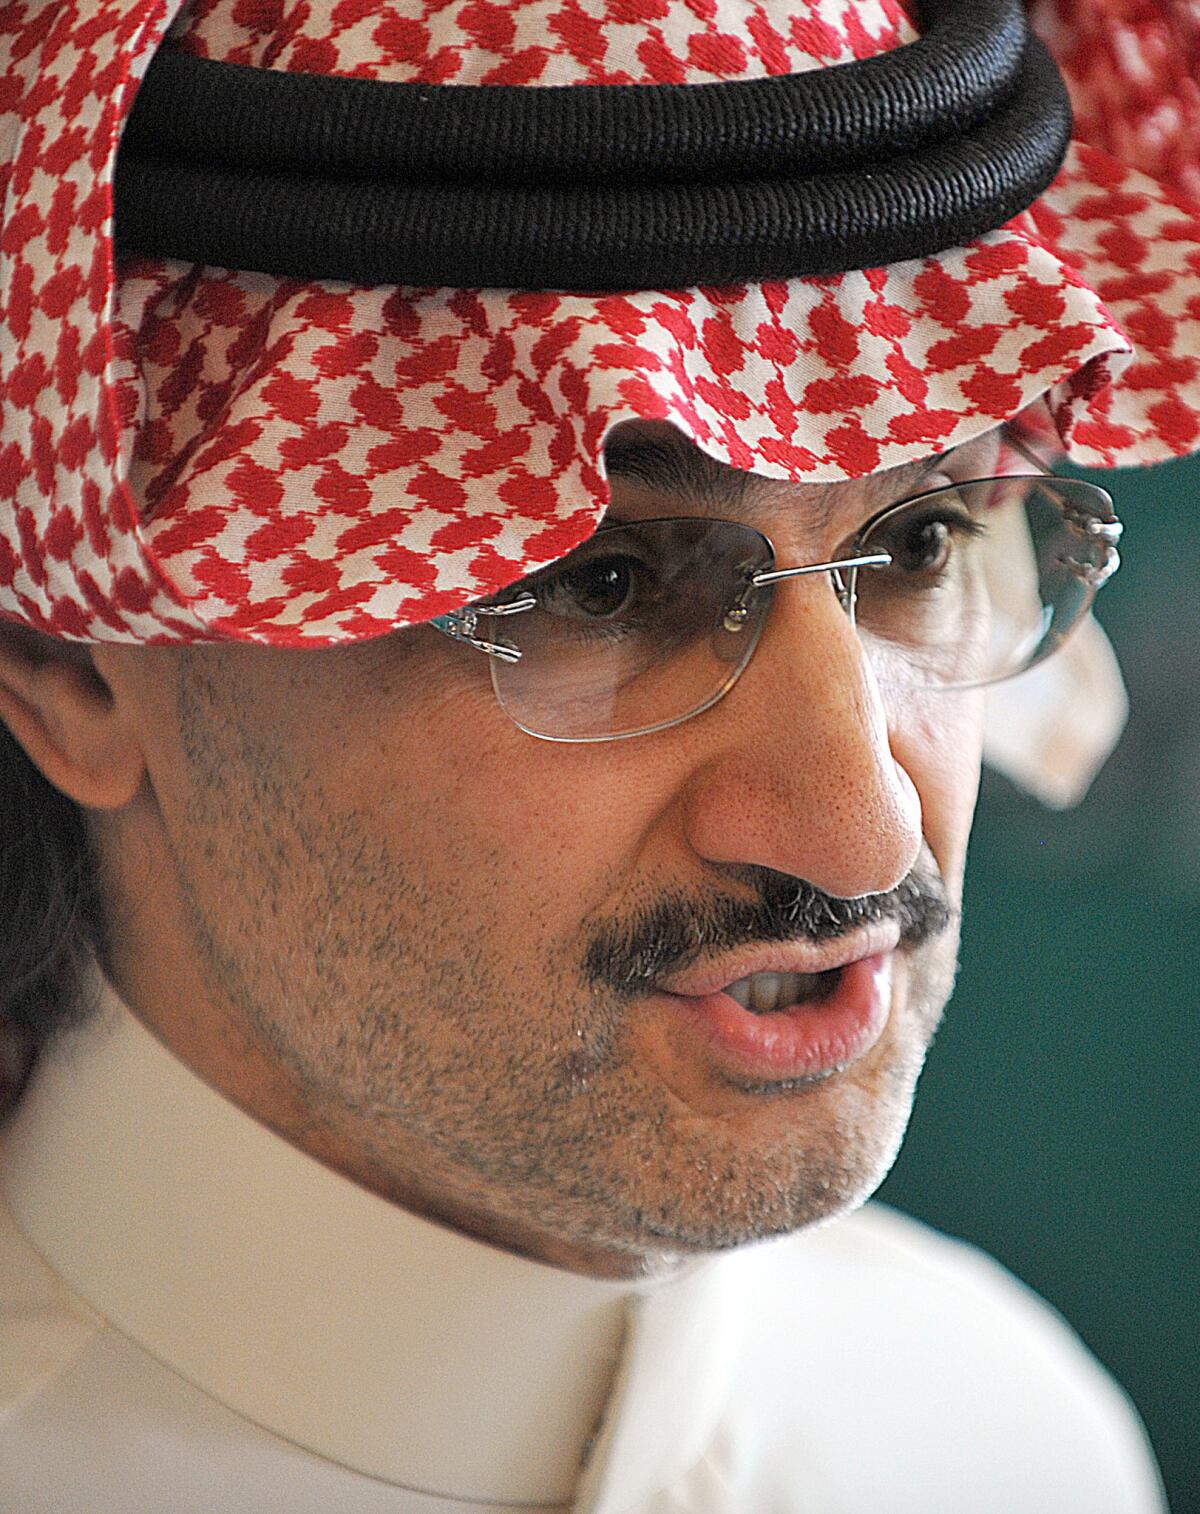 Saudi Prince Alwaleed bin Talal, above at a news conference in September 2011 in Riyadh, advocates allowing Saudi women to drive.